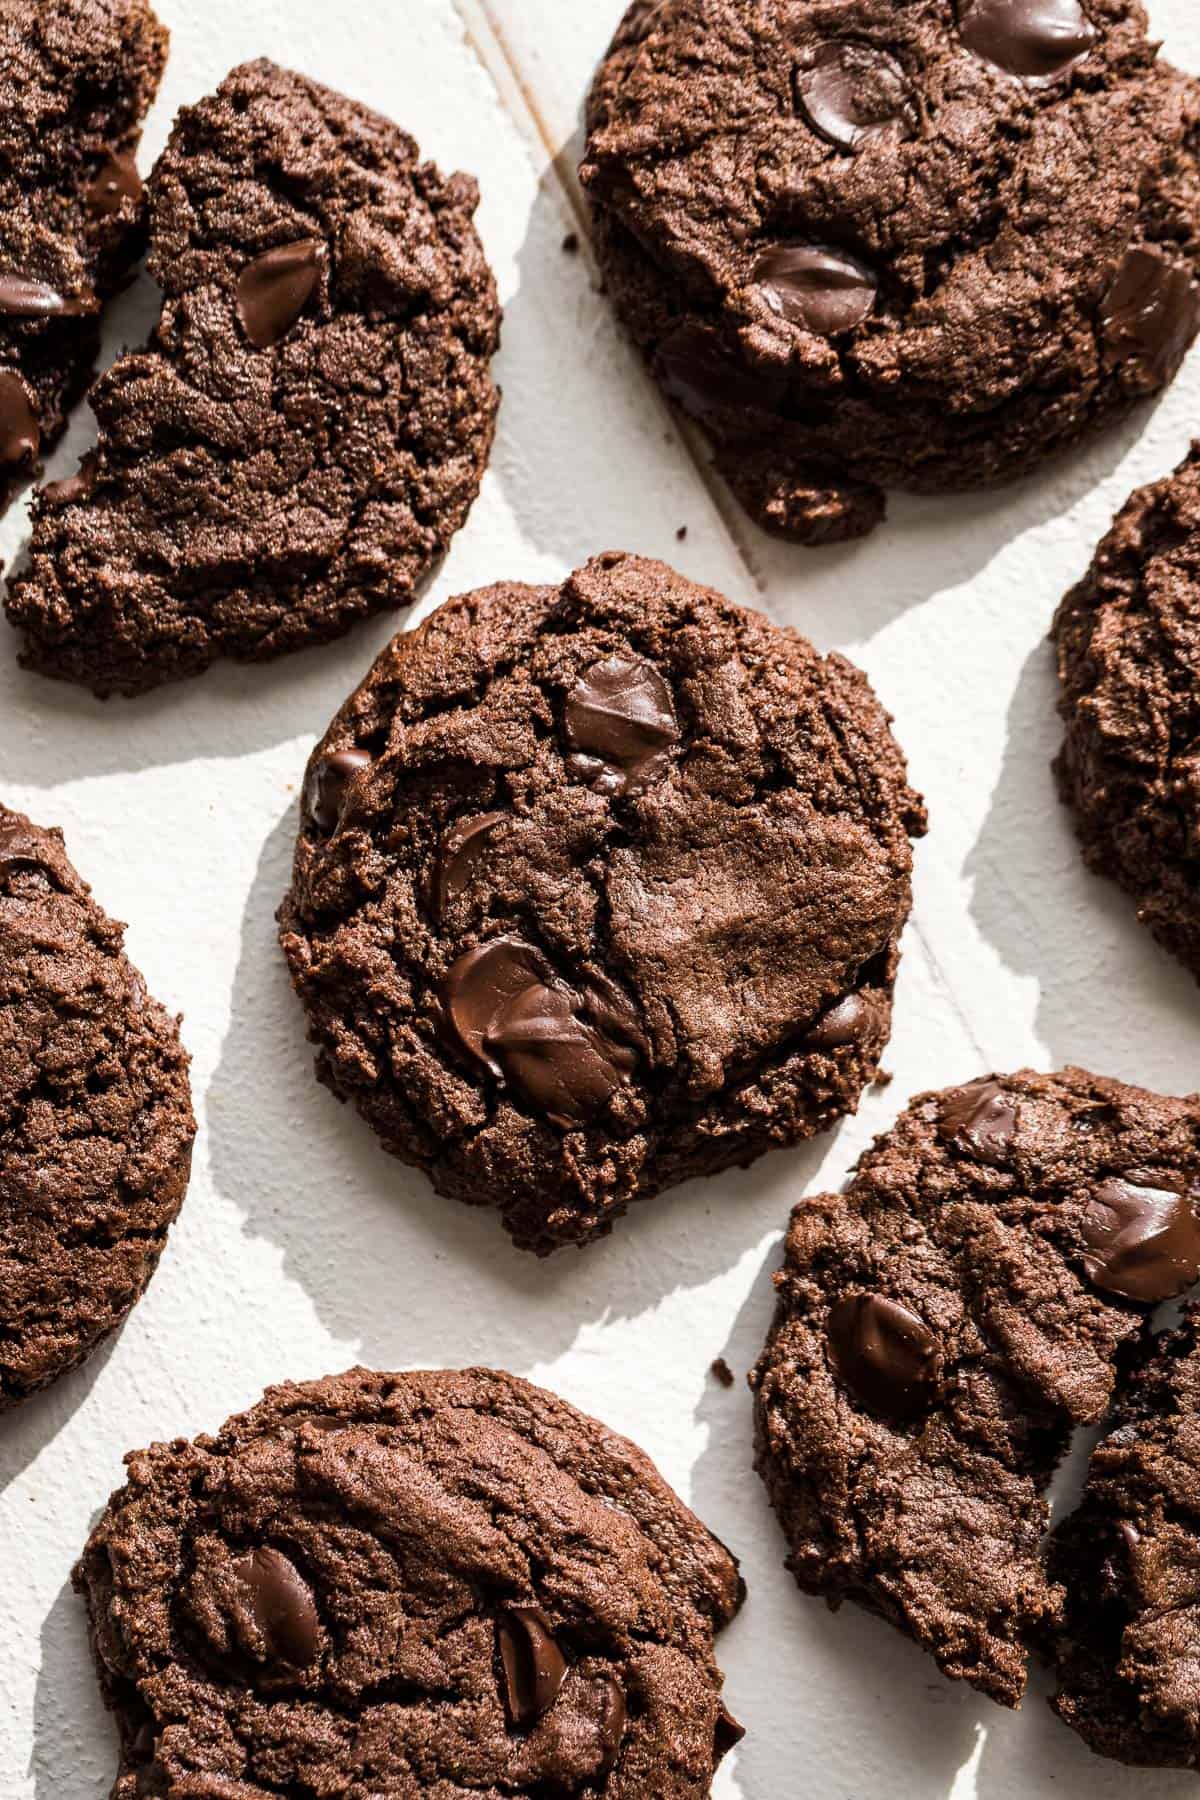 Seven chocolate almond butter cookies on a white background with one cookie broken in half.